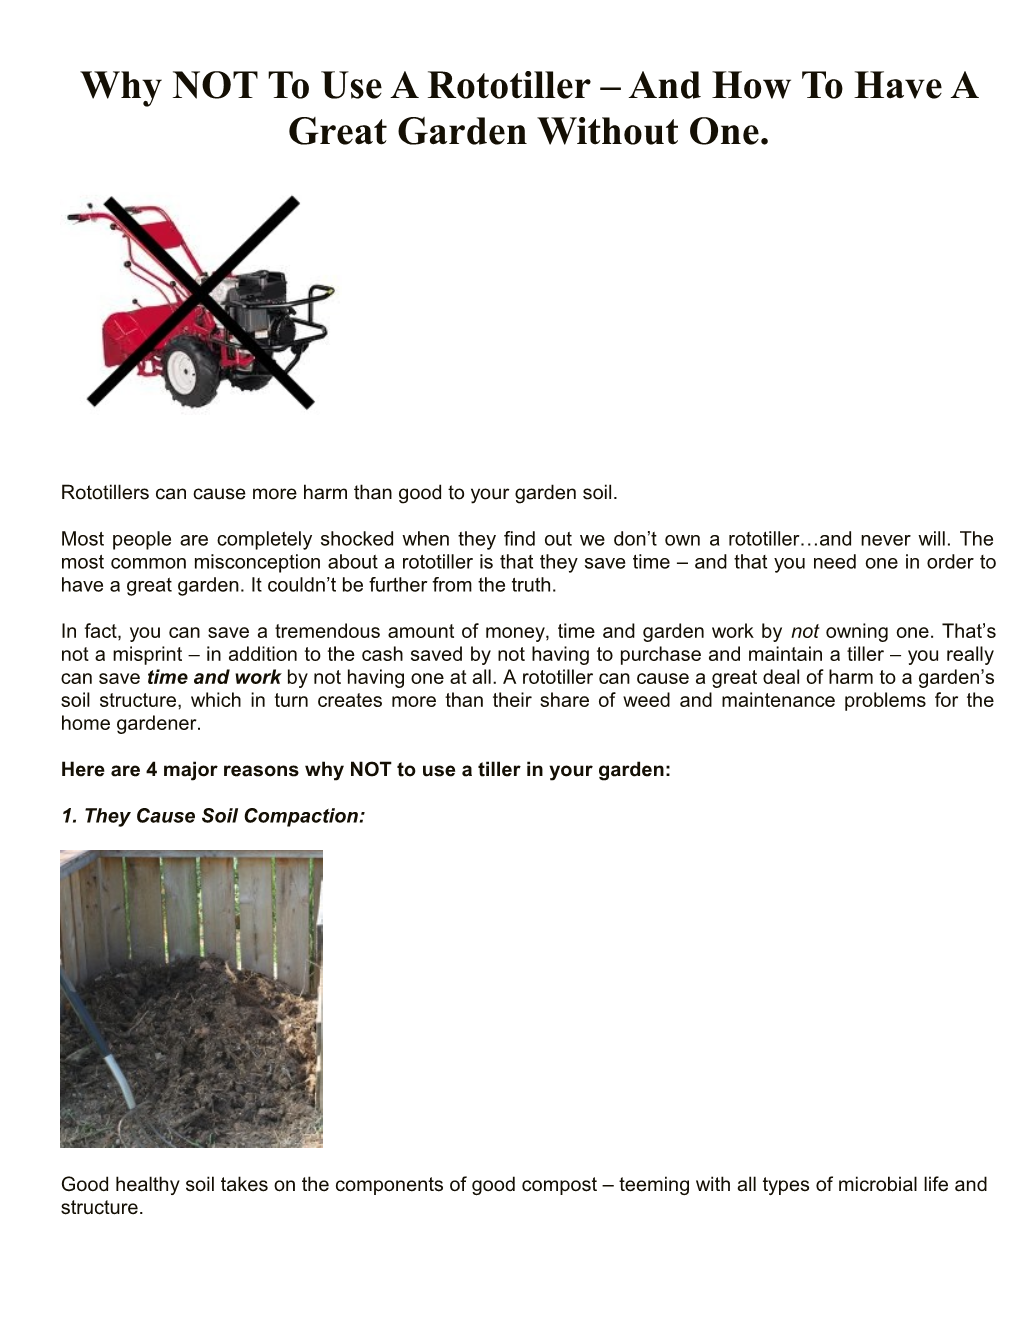 Why NOT to Use a Rototiller and How to Have a Great Garden Without One